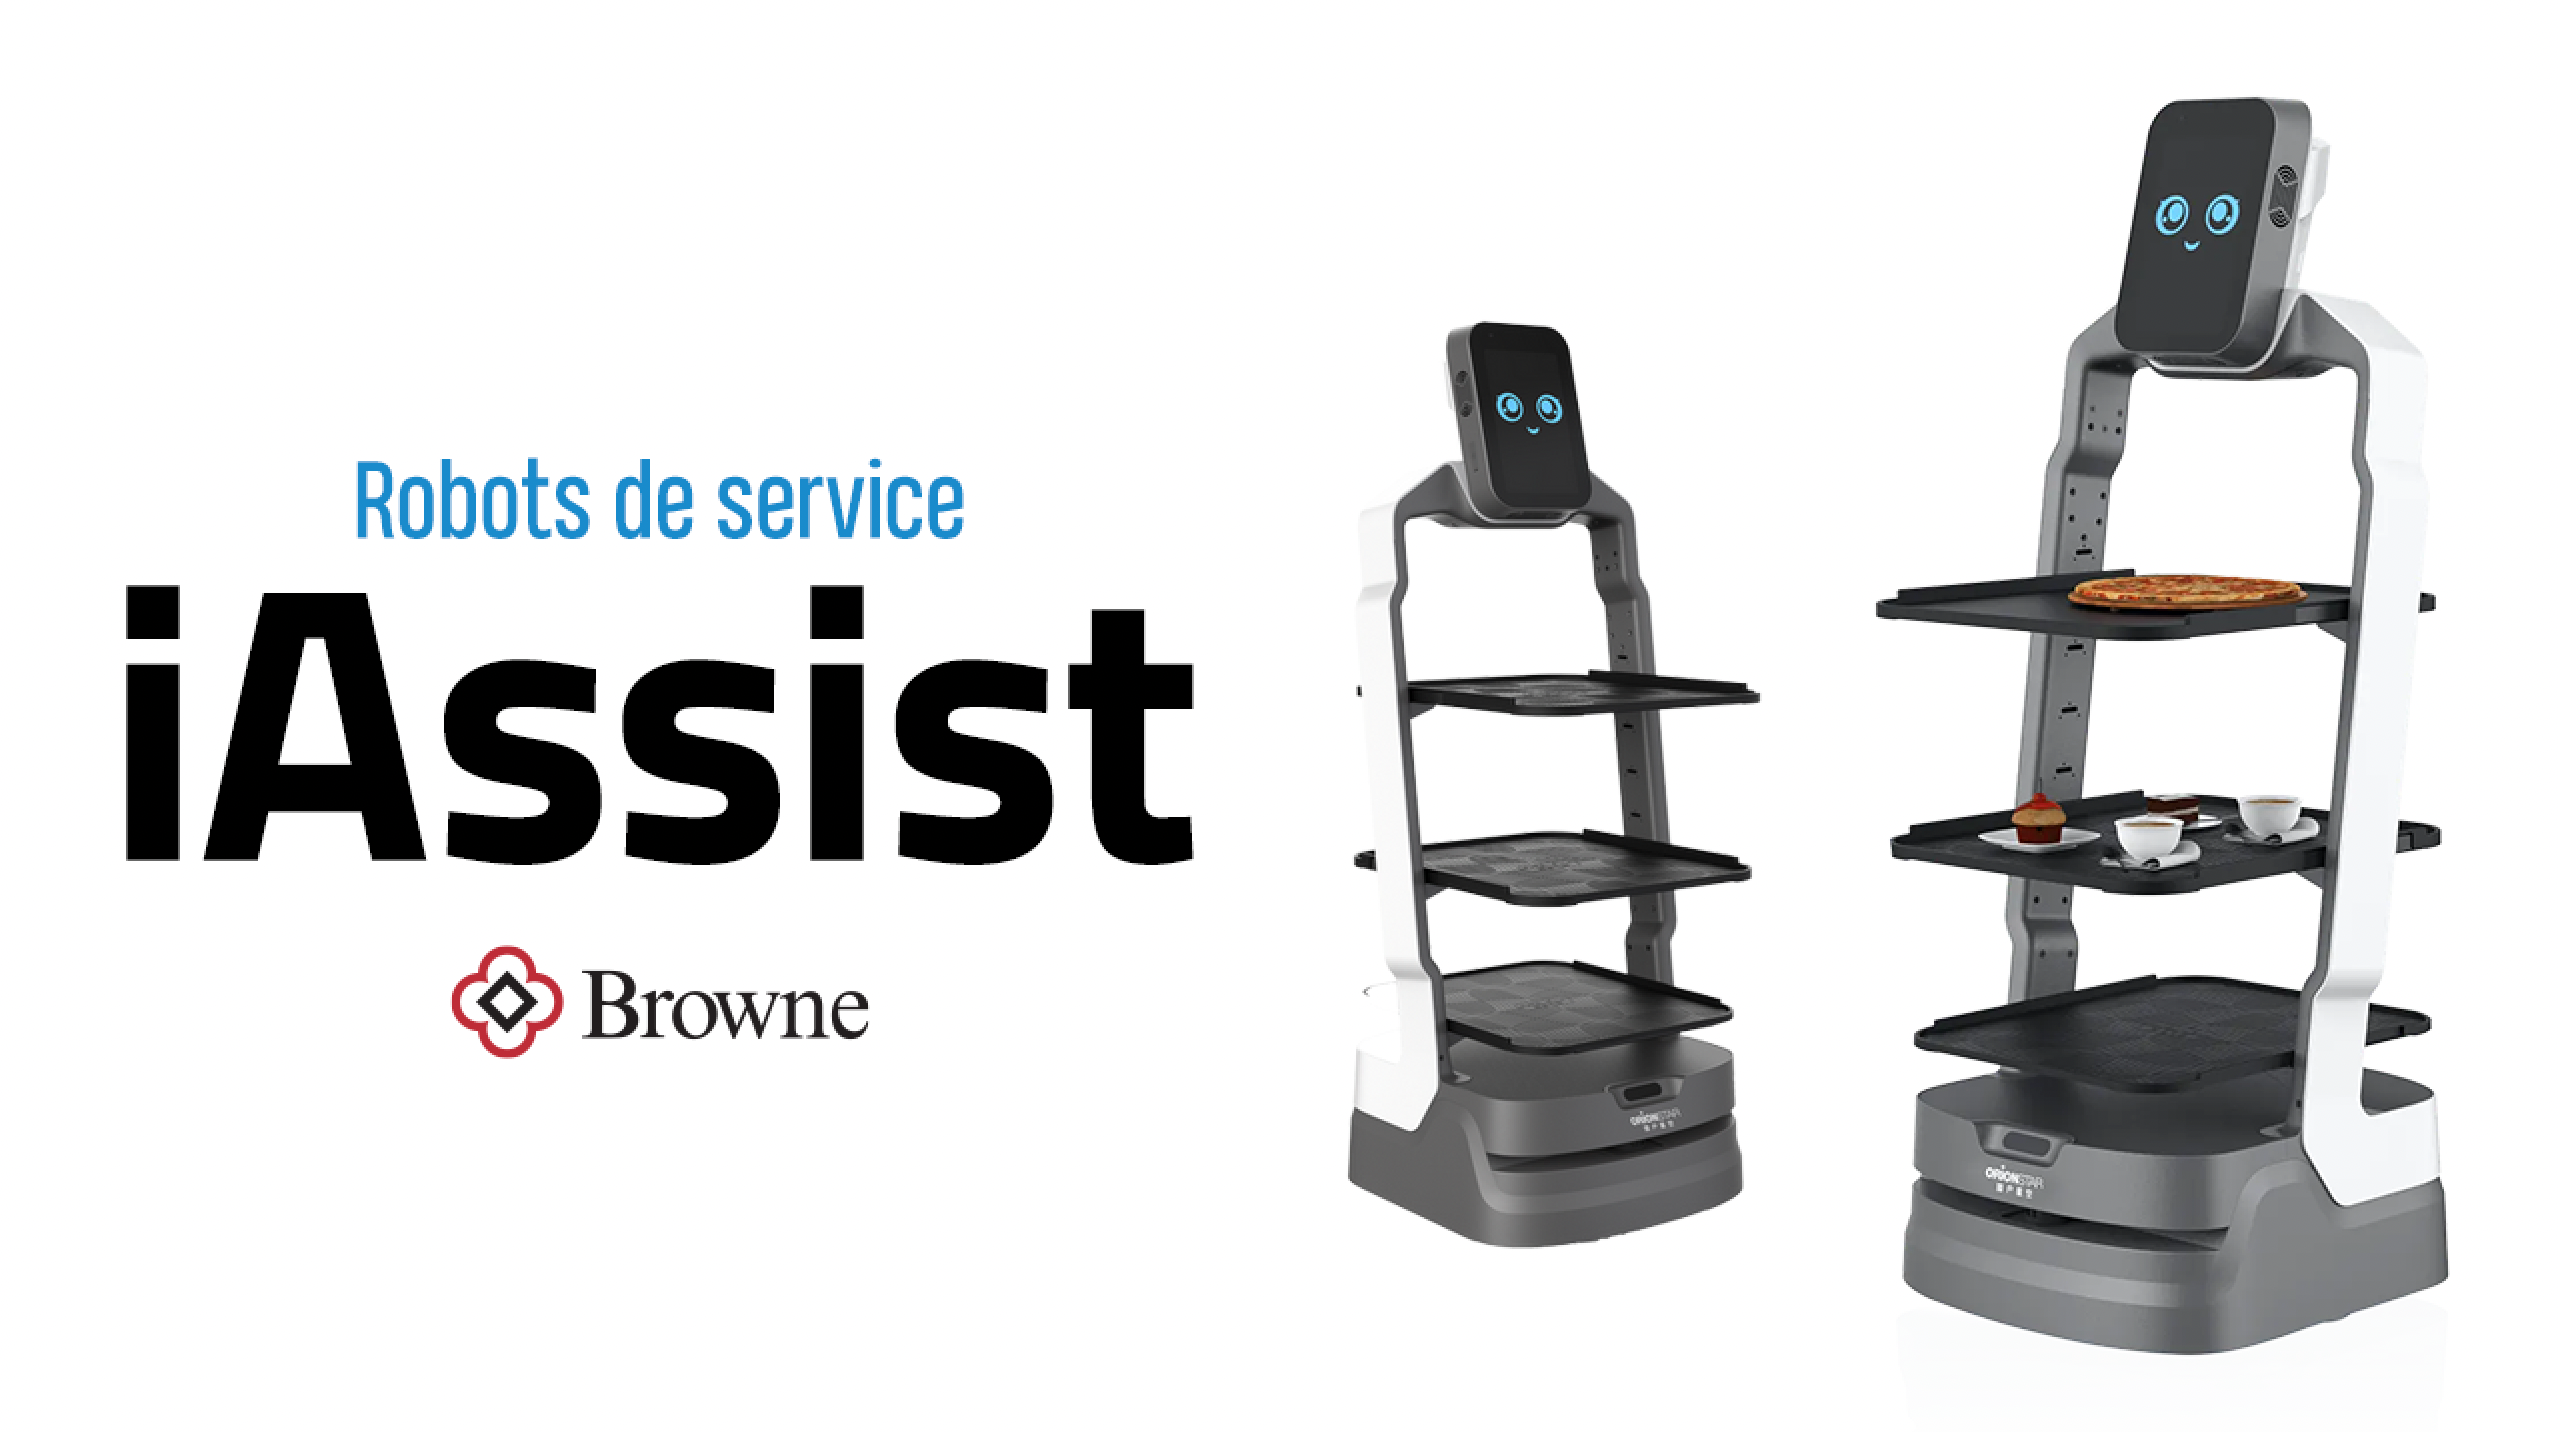 Robot servers: test the future of foodservice - Browne iAssist 